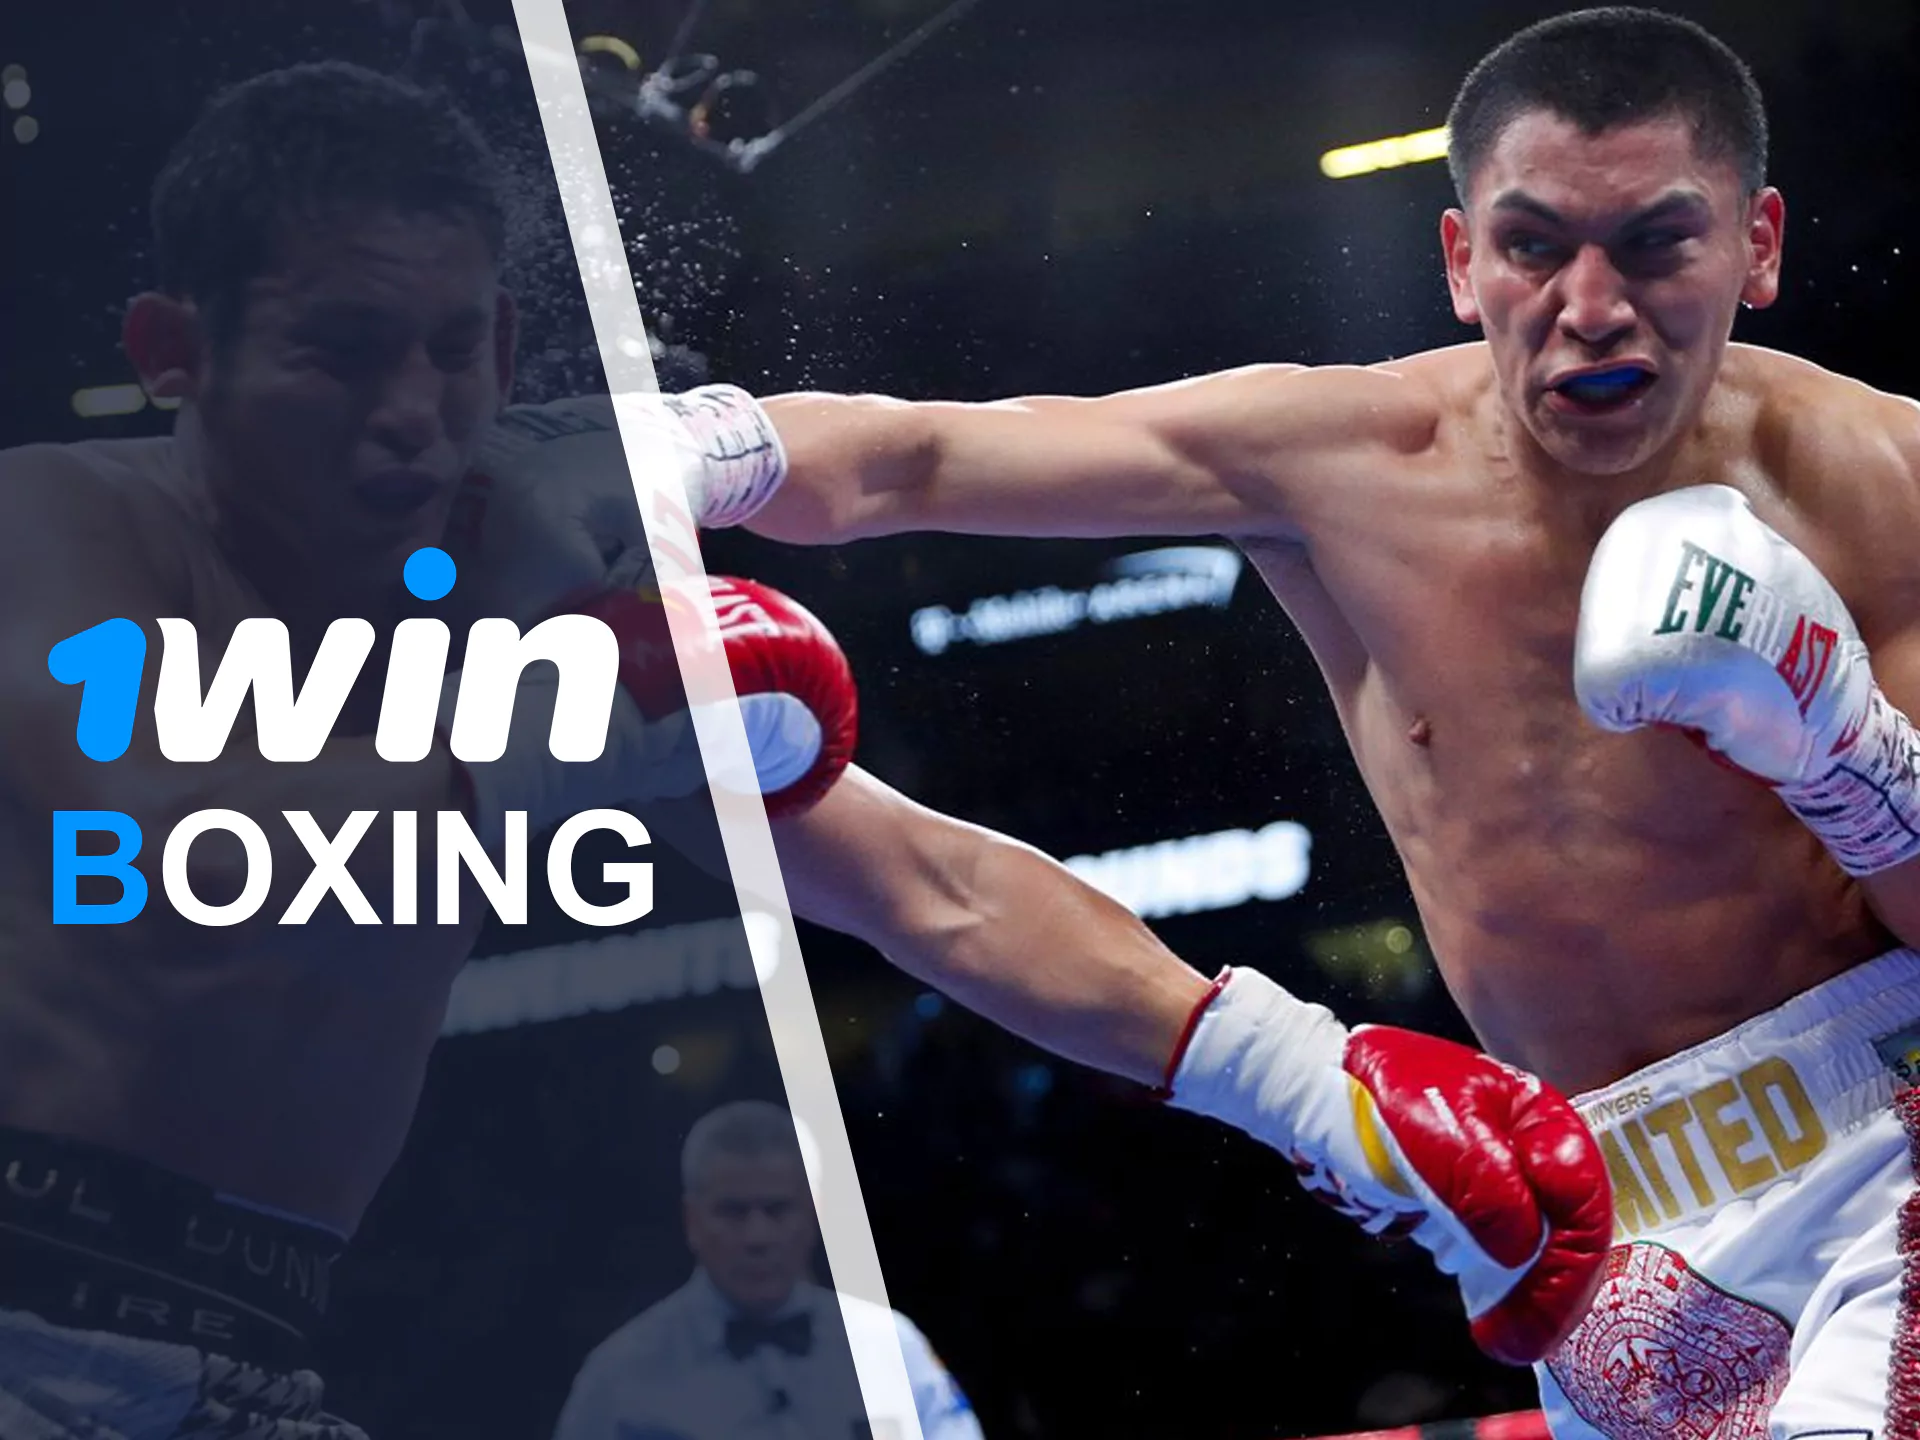 Watch and bet on the best boxing matches at 1win.